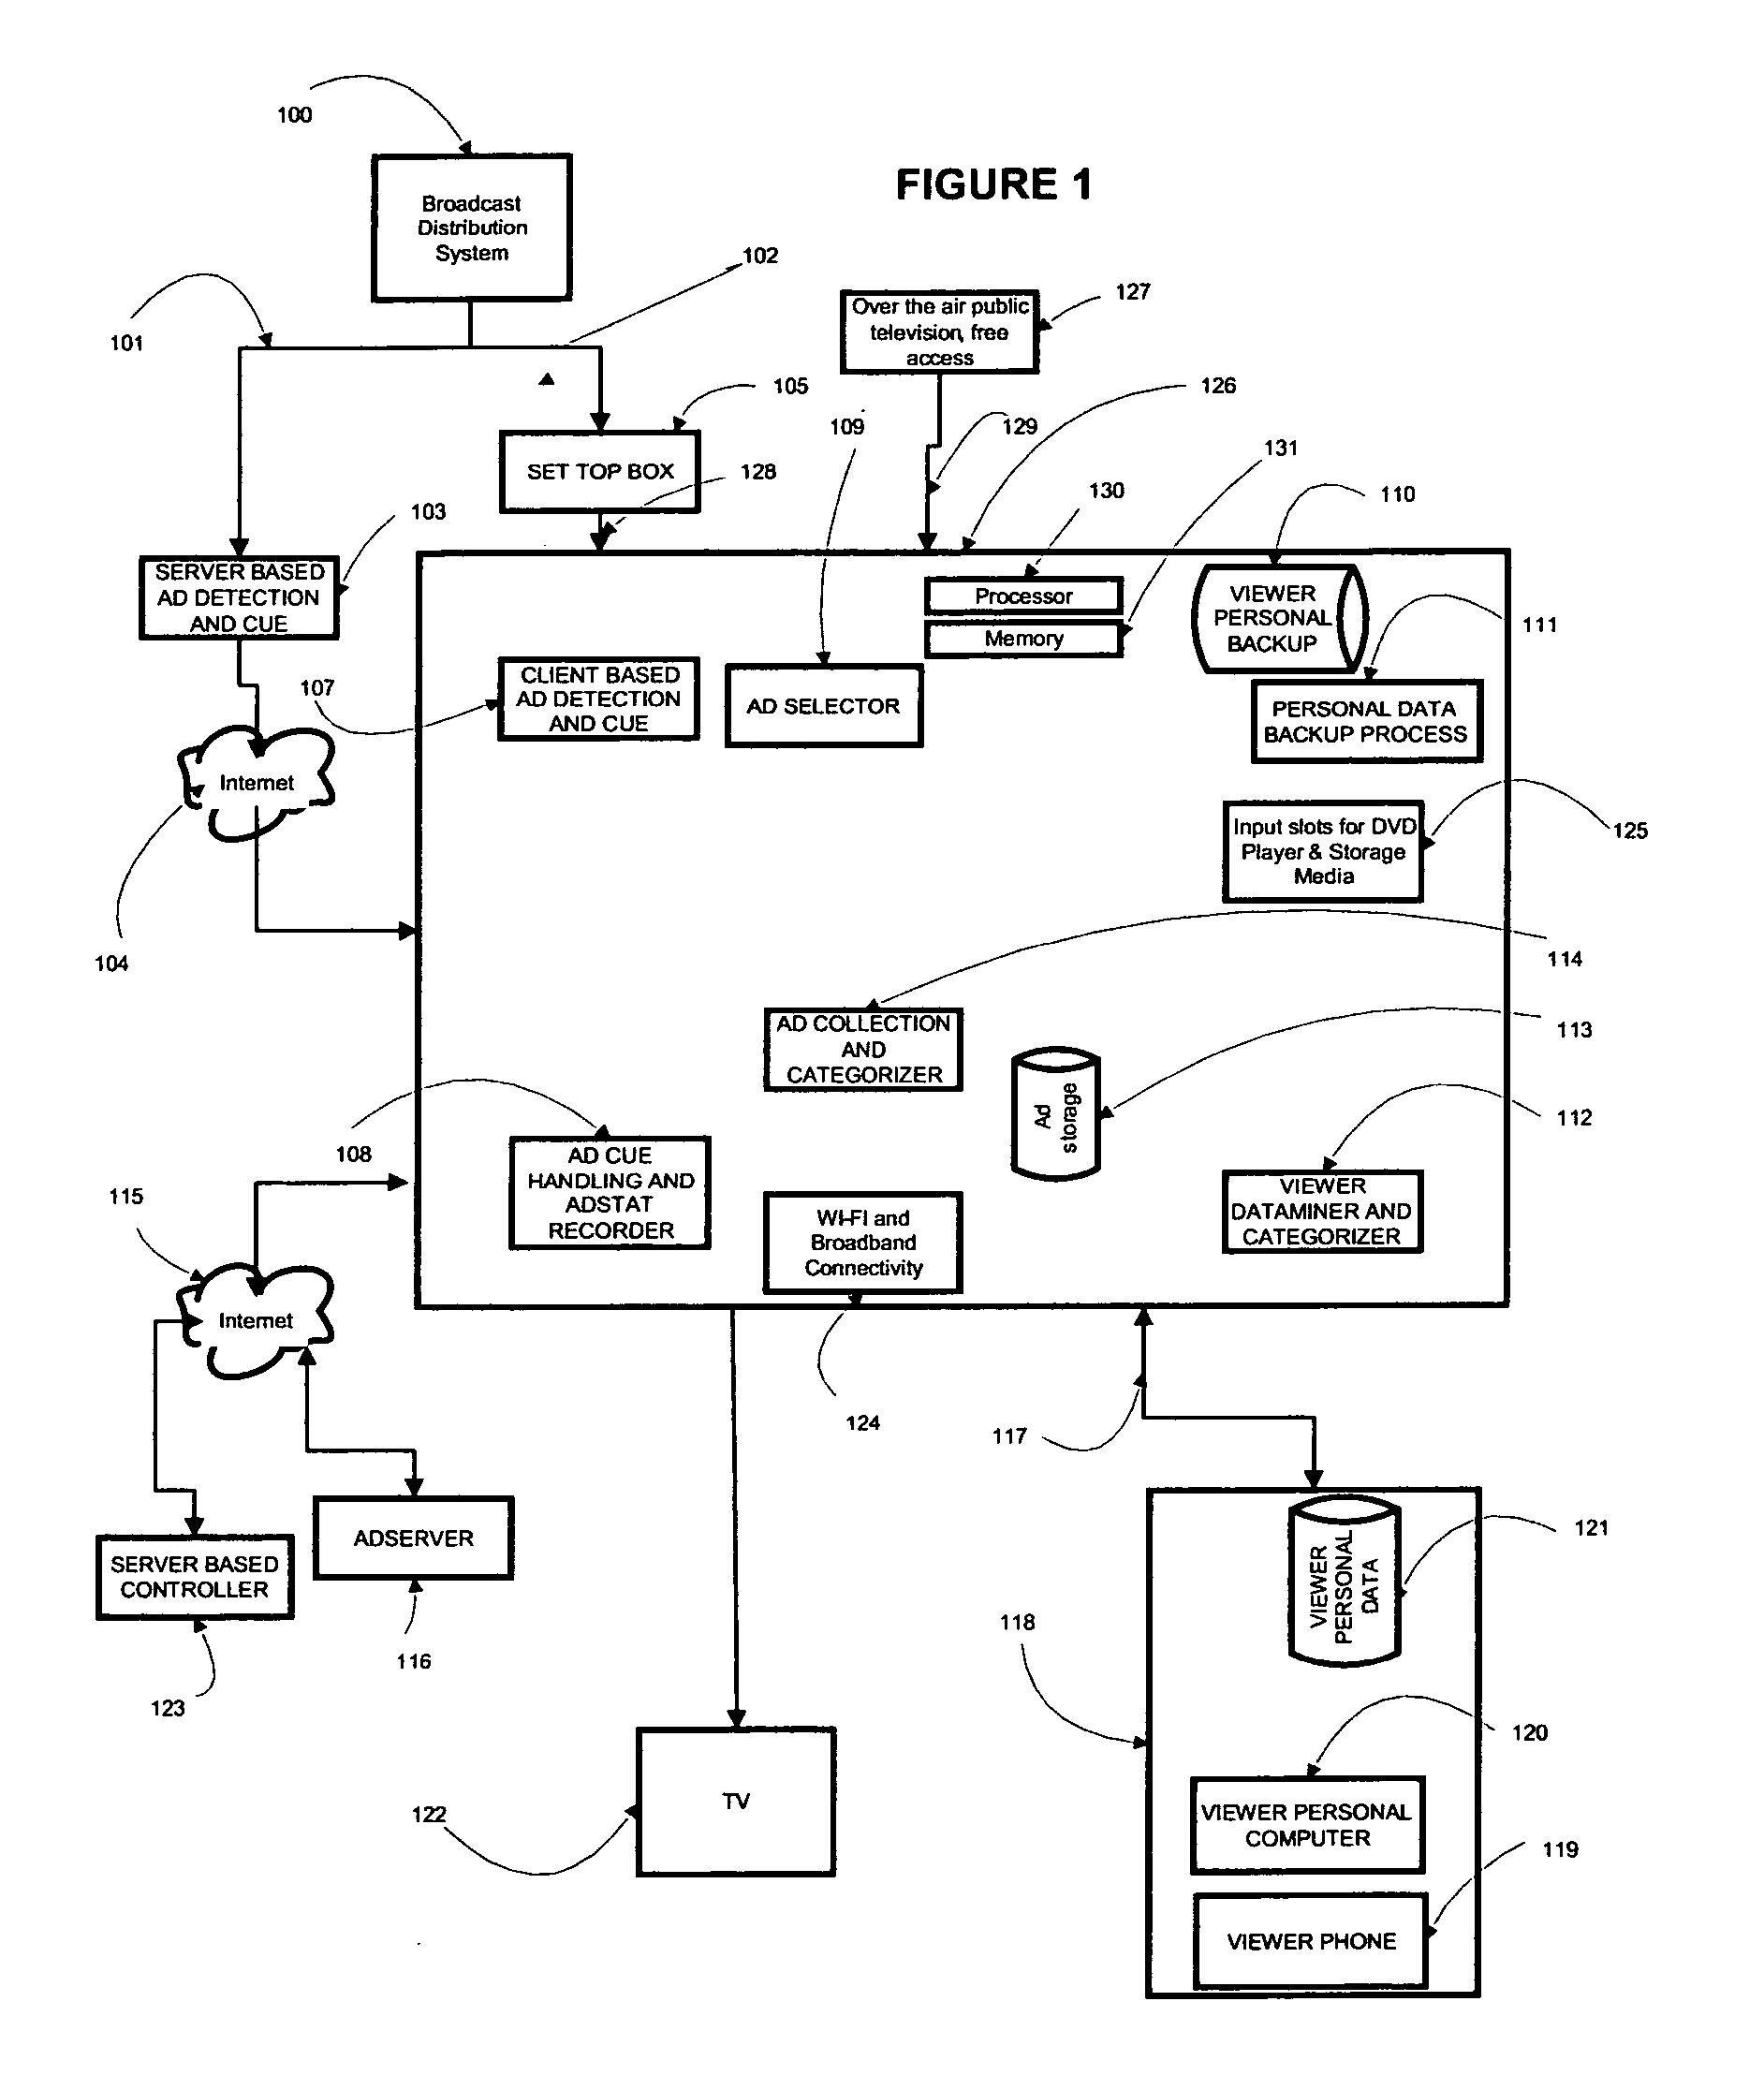 System and methods for switching between two or more media streams